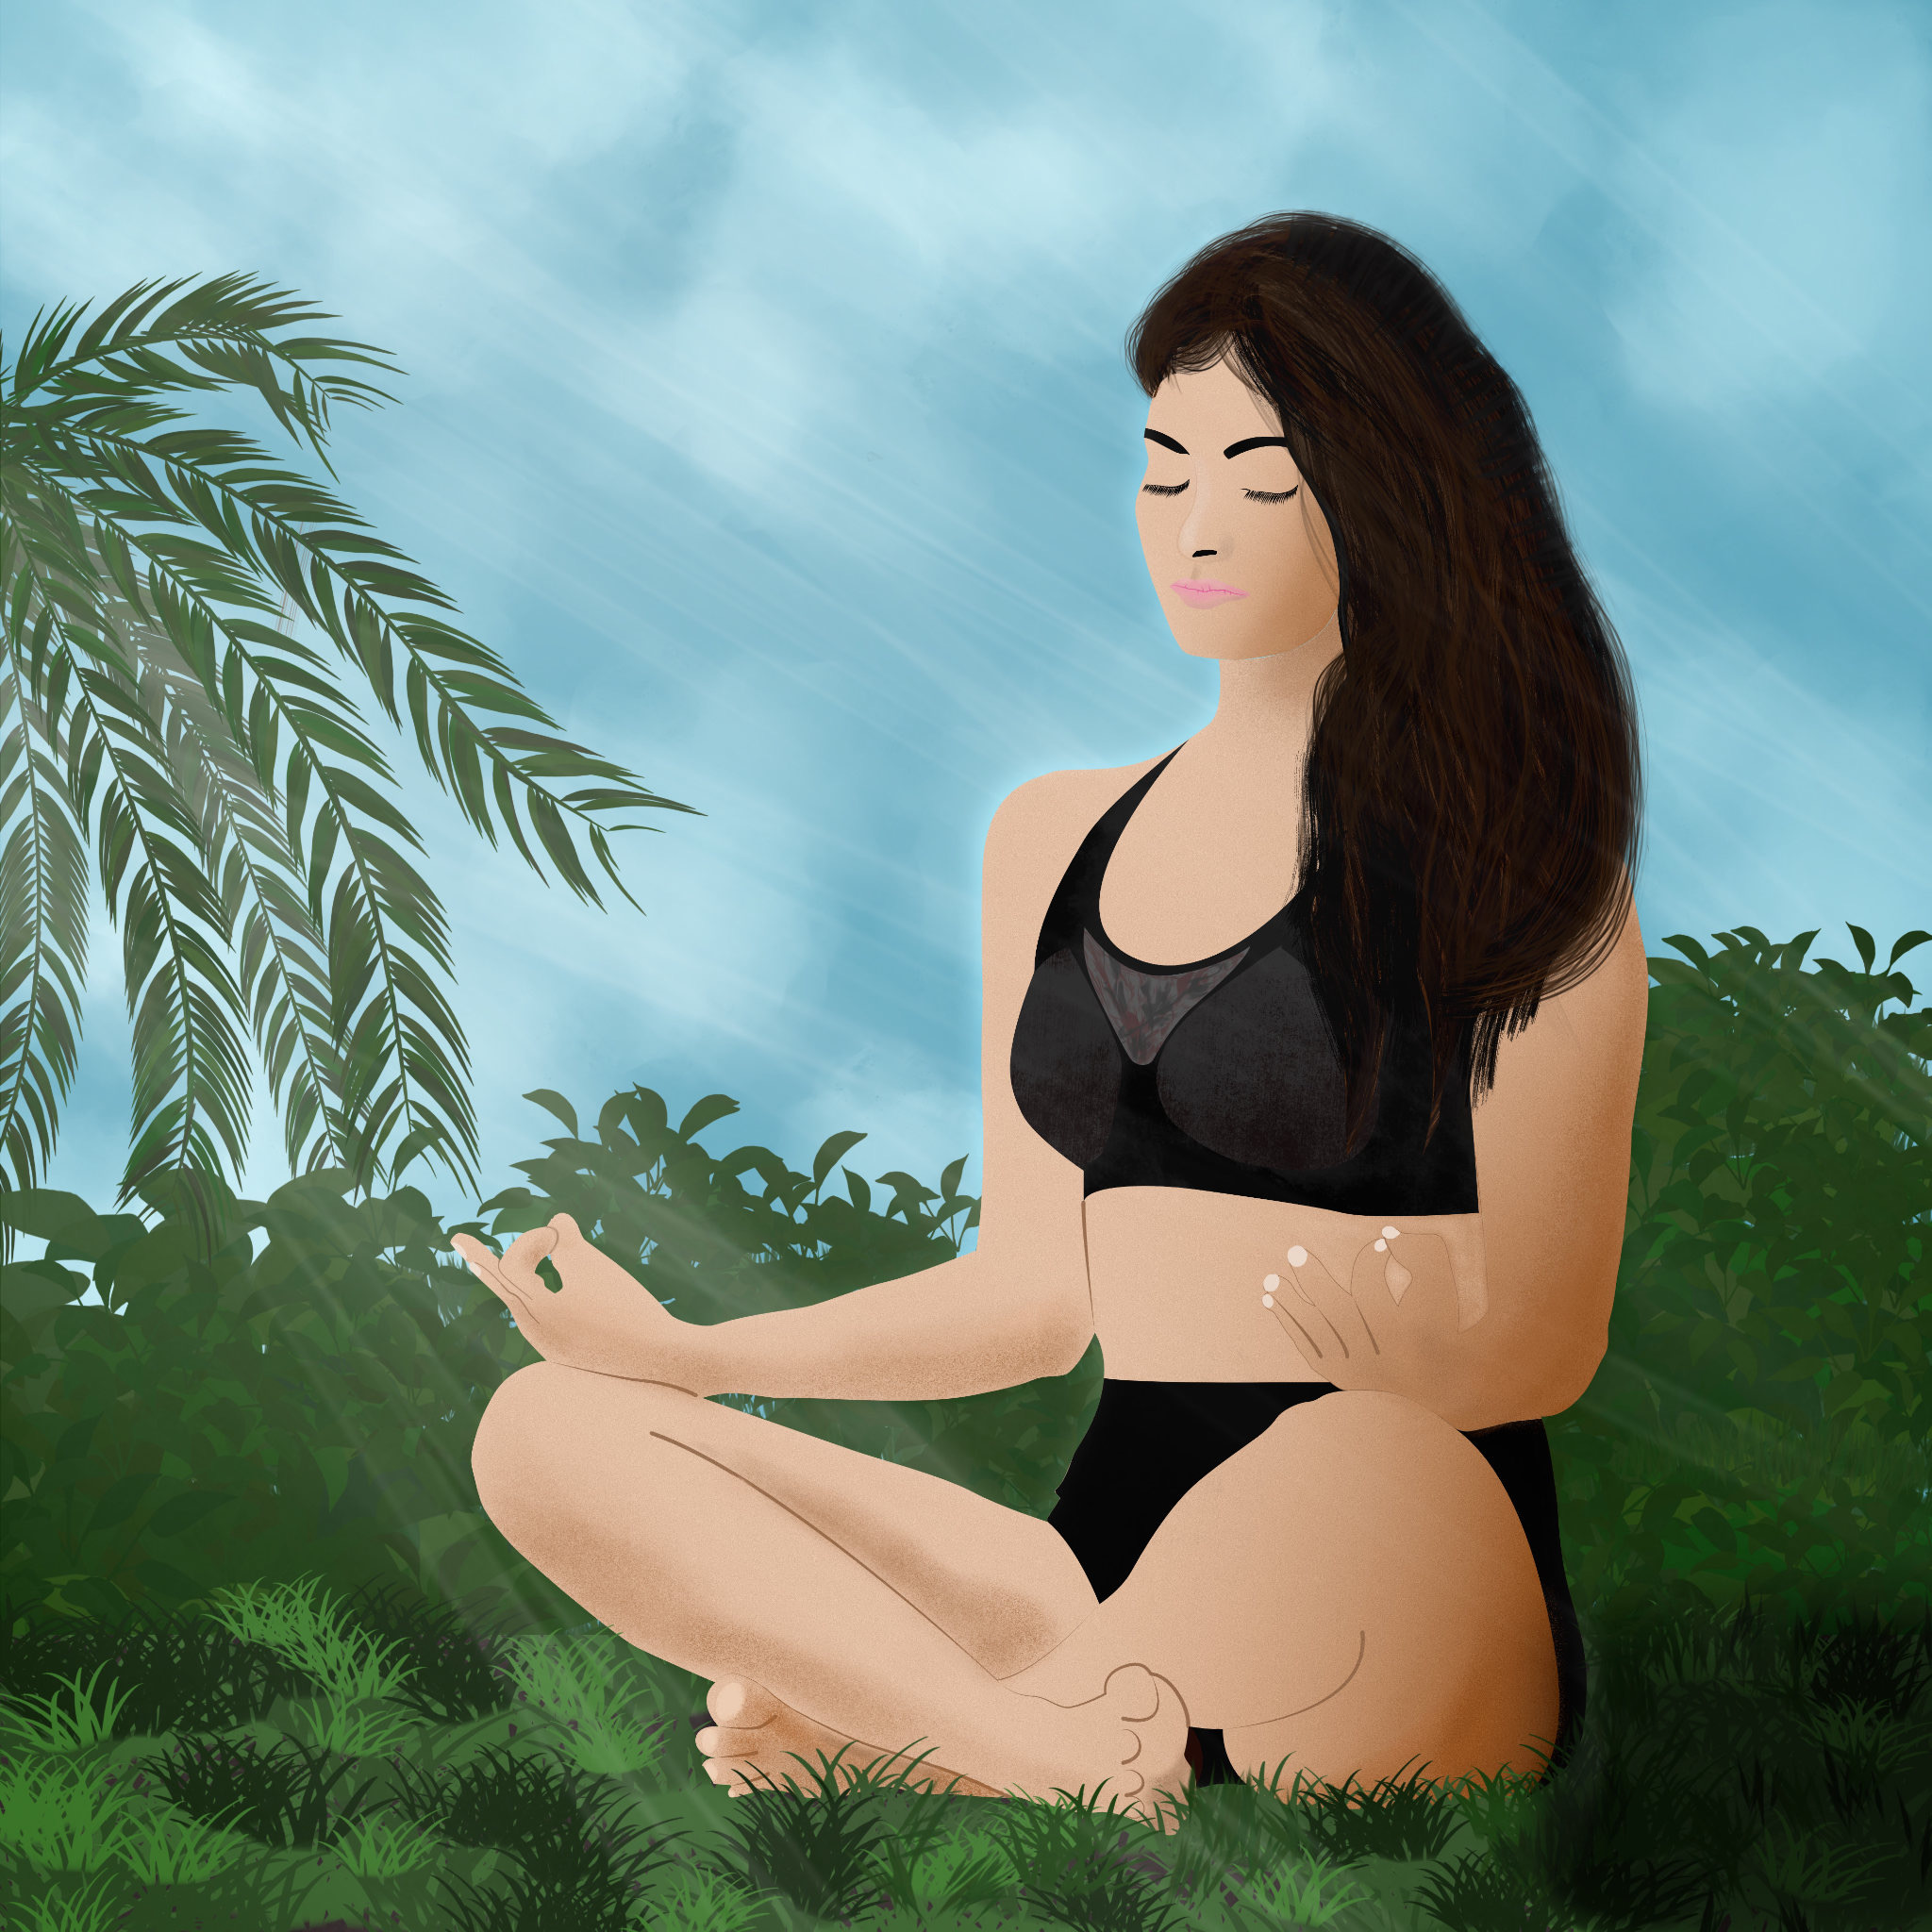 Illustration of young woman meditating in a tropical setting